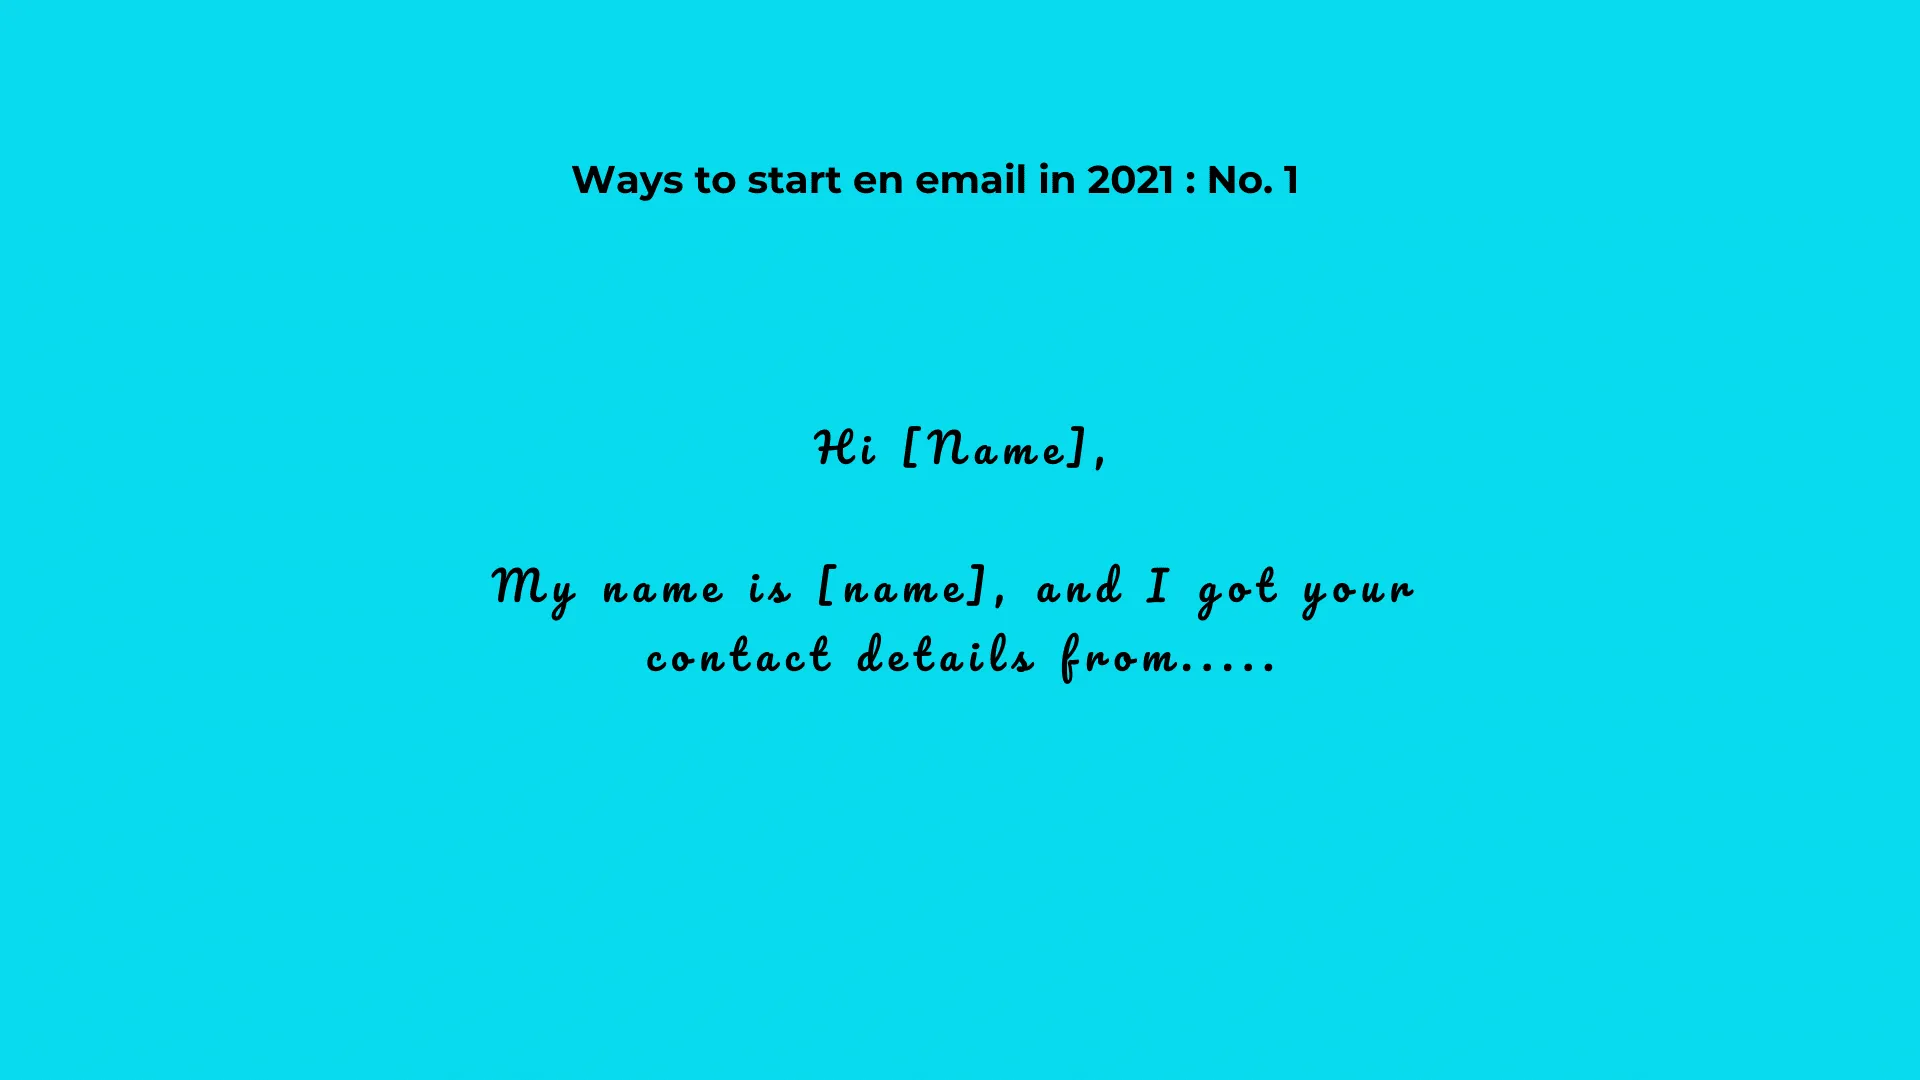 19-ways-to-start-an-email-way-1